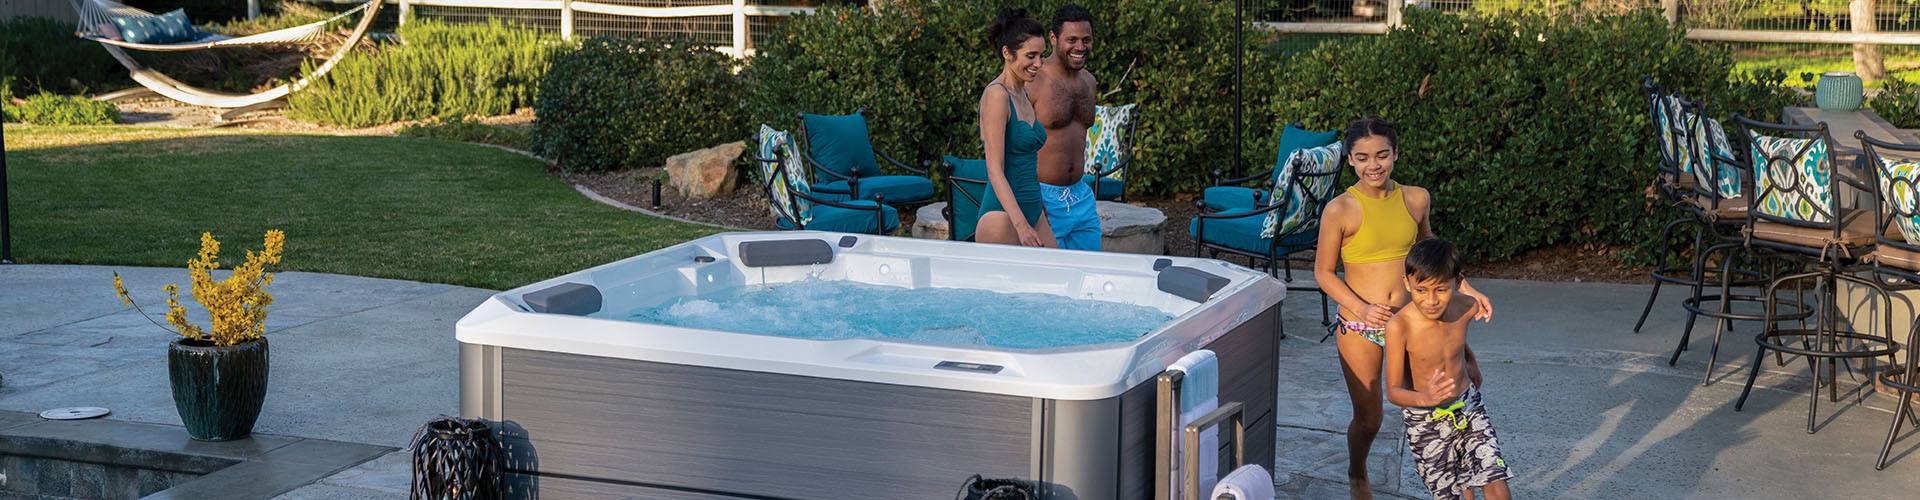 Make the Most of Family Time with a Hot Spring® Spa